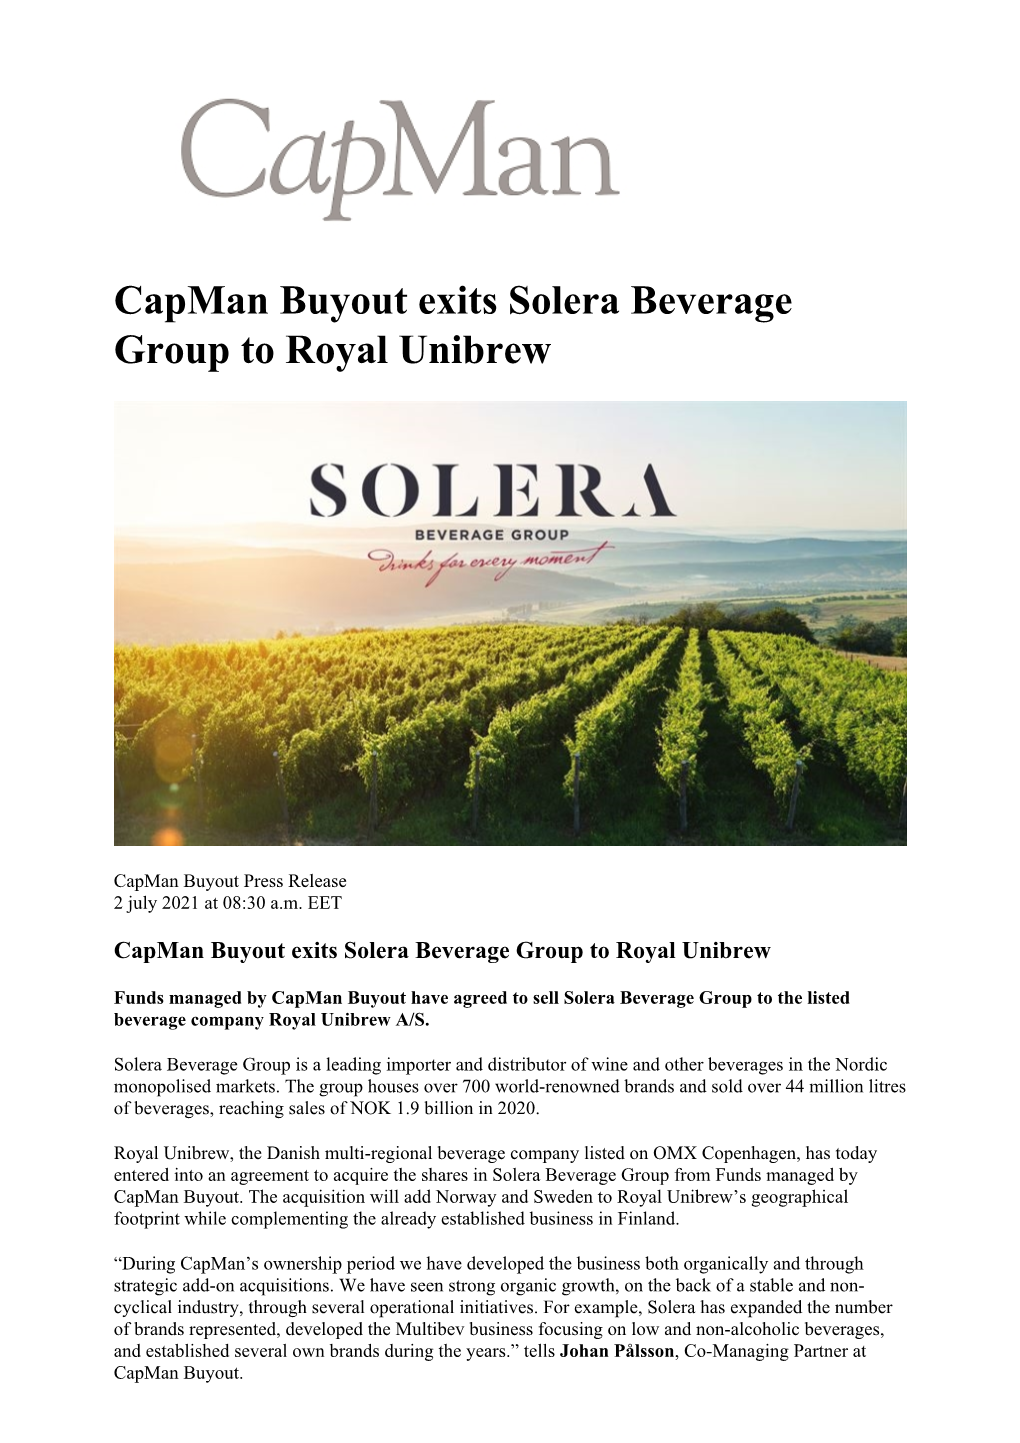 Capman Buyout Exits Solera Beverage Group to Royal Unibrew